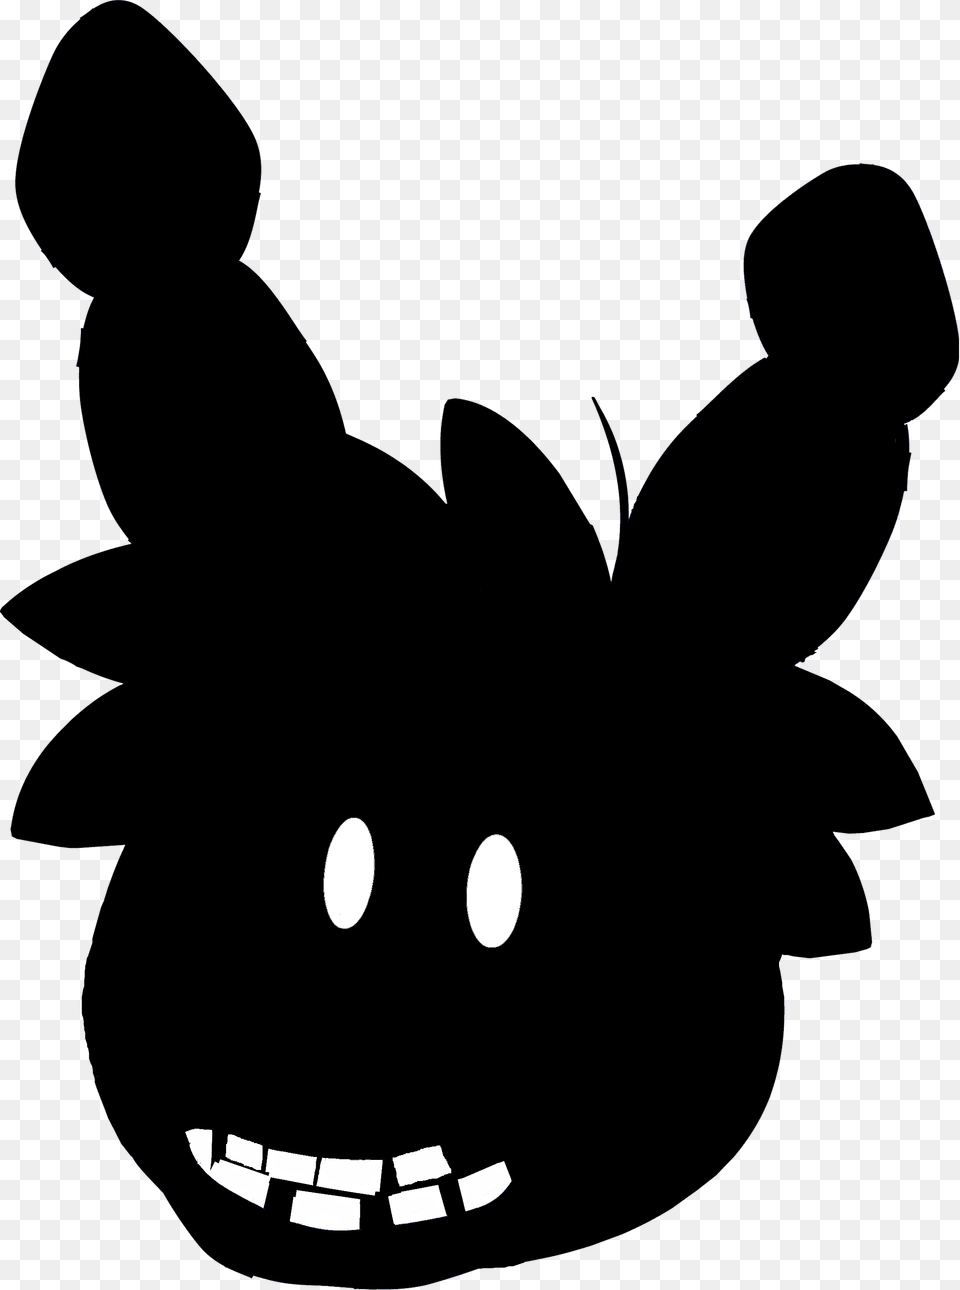 Puffle Shadow Bonnie Five Nights At Freddy39s Club Penguin Five Nights At Freddy39s 4 Club Penguin, Astronomy, Moon, Nature, Night Png